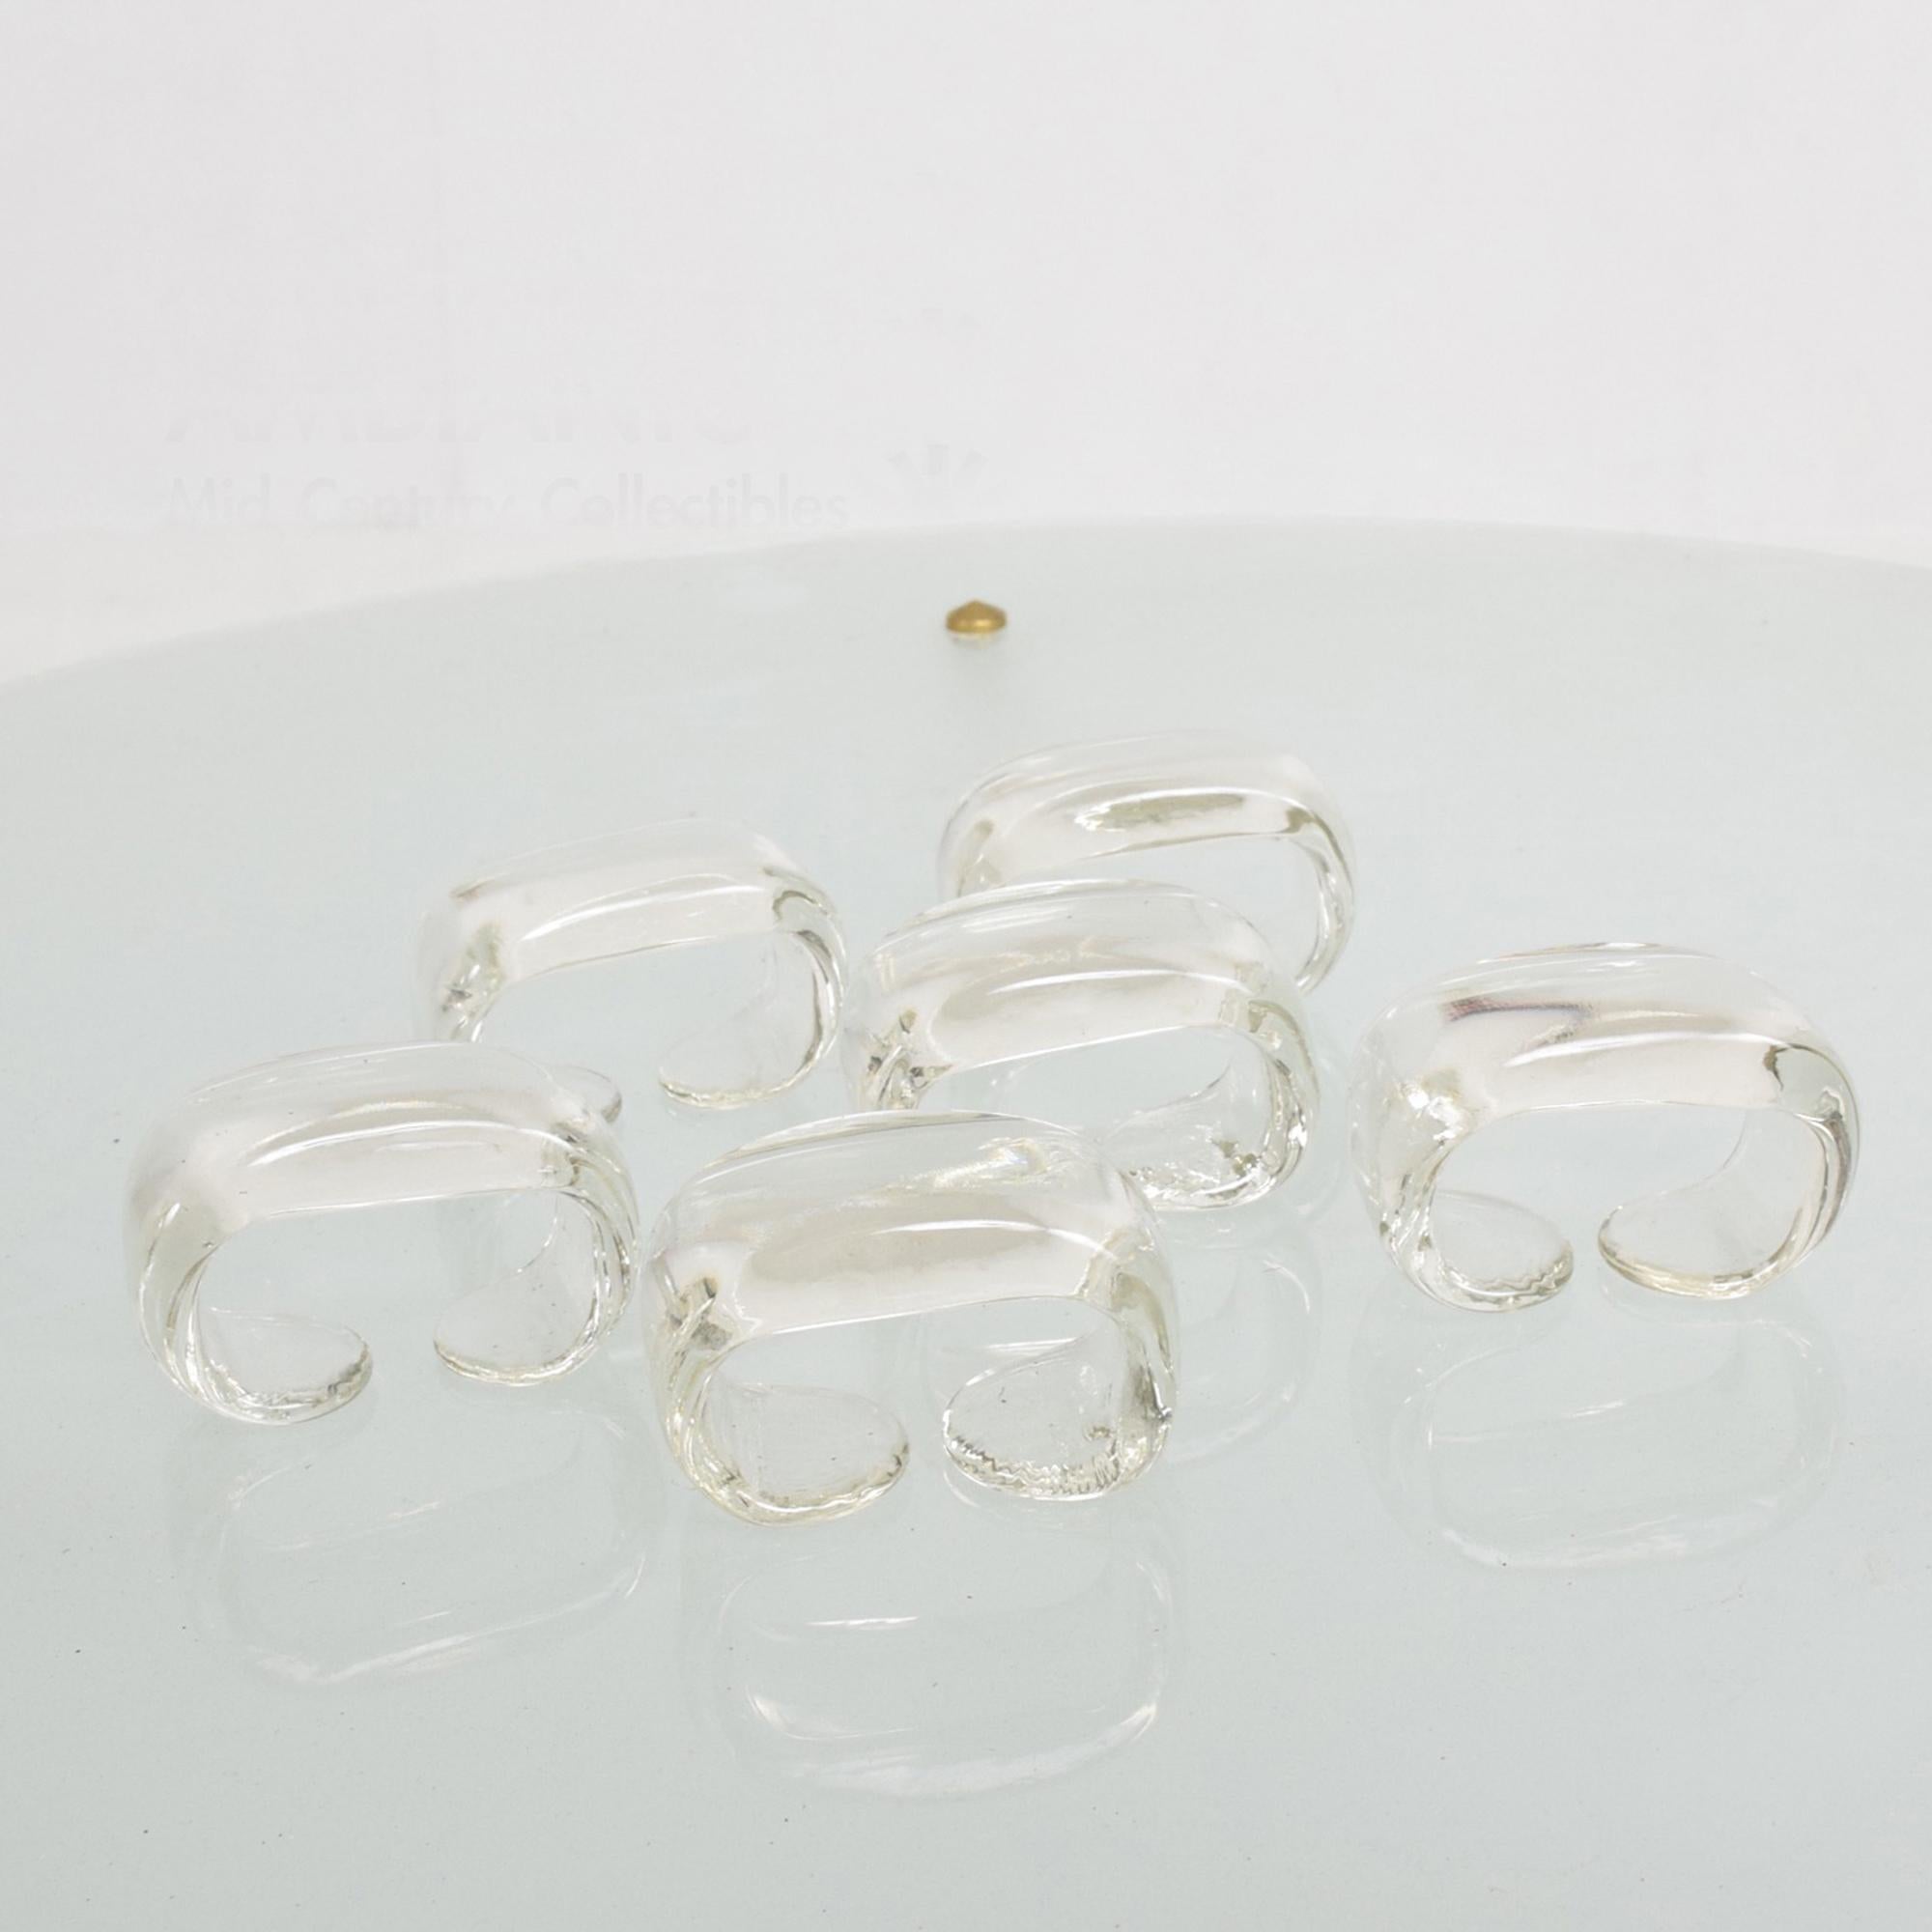 1960s Hollywood Regency modern style of Daum art glass, set of 6 glass napkin ring holders 
No label apparent. In the manner of Daum Nancy art glass, France. 
 Dimensions: 2 1/4